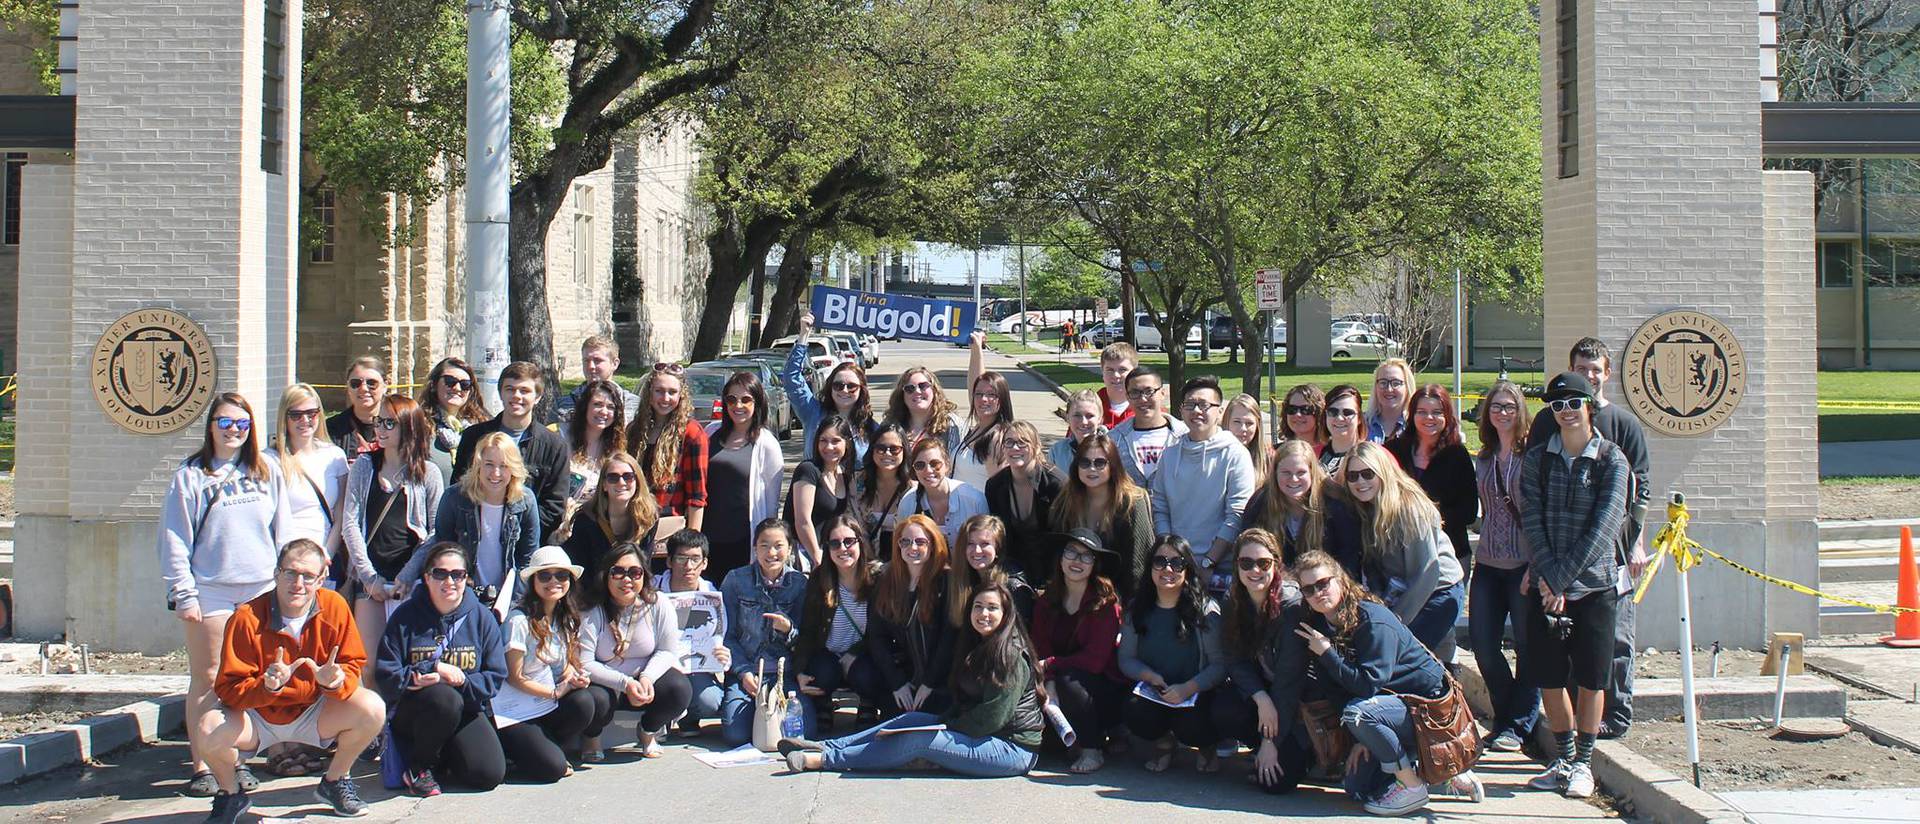 About 50 Blugolds explored the diverse regions of Louisiana during spring break as part of an immersion program.